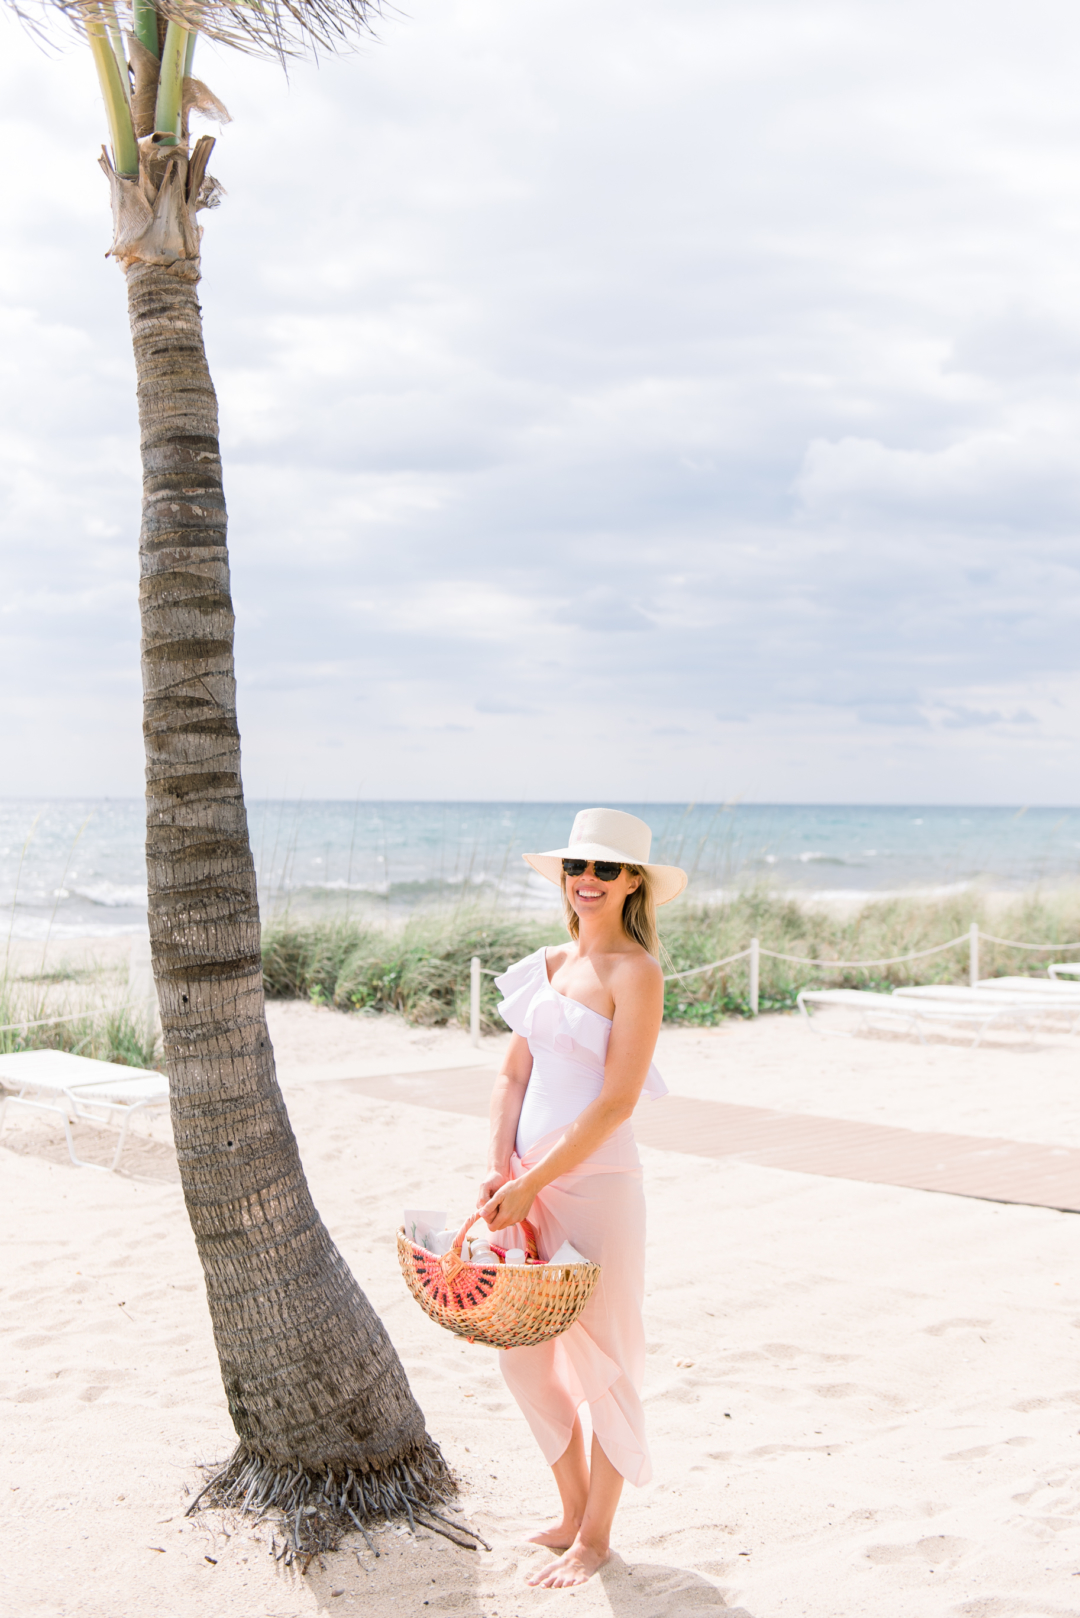 Travel: Pineapple Pad's Beach Picnic with Palm Beach Lately